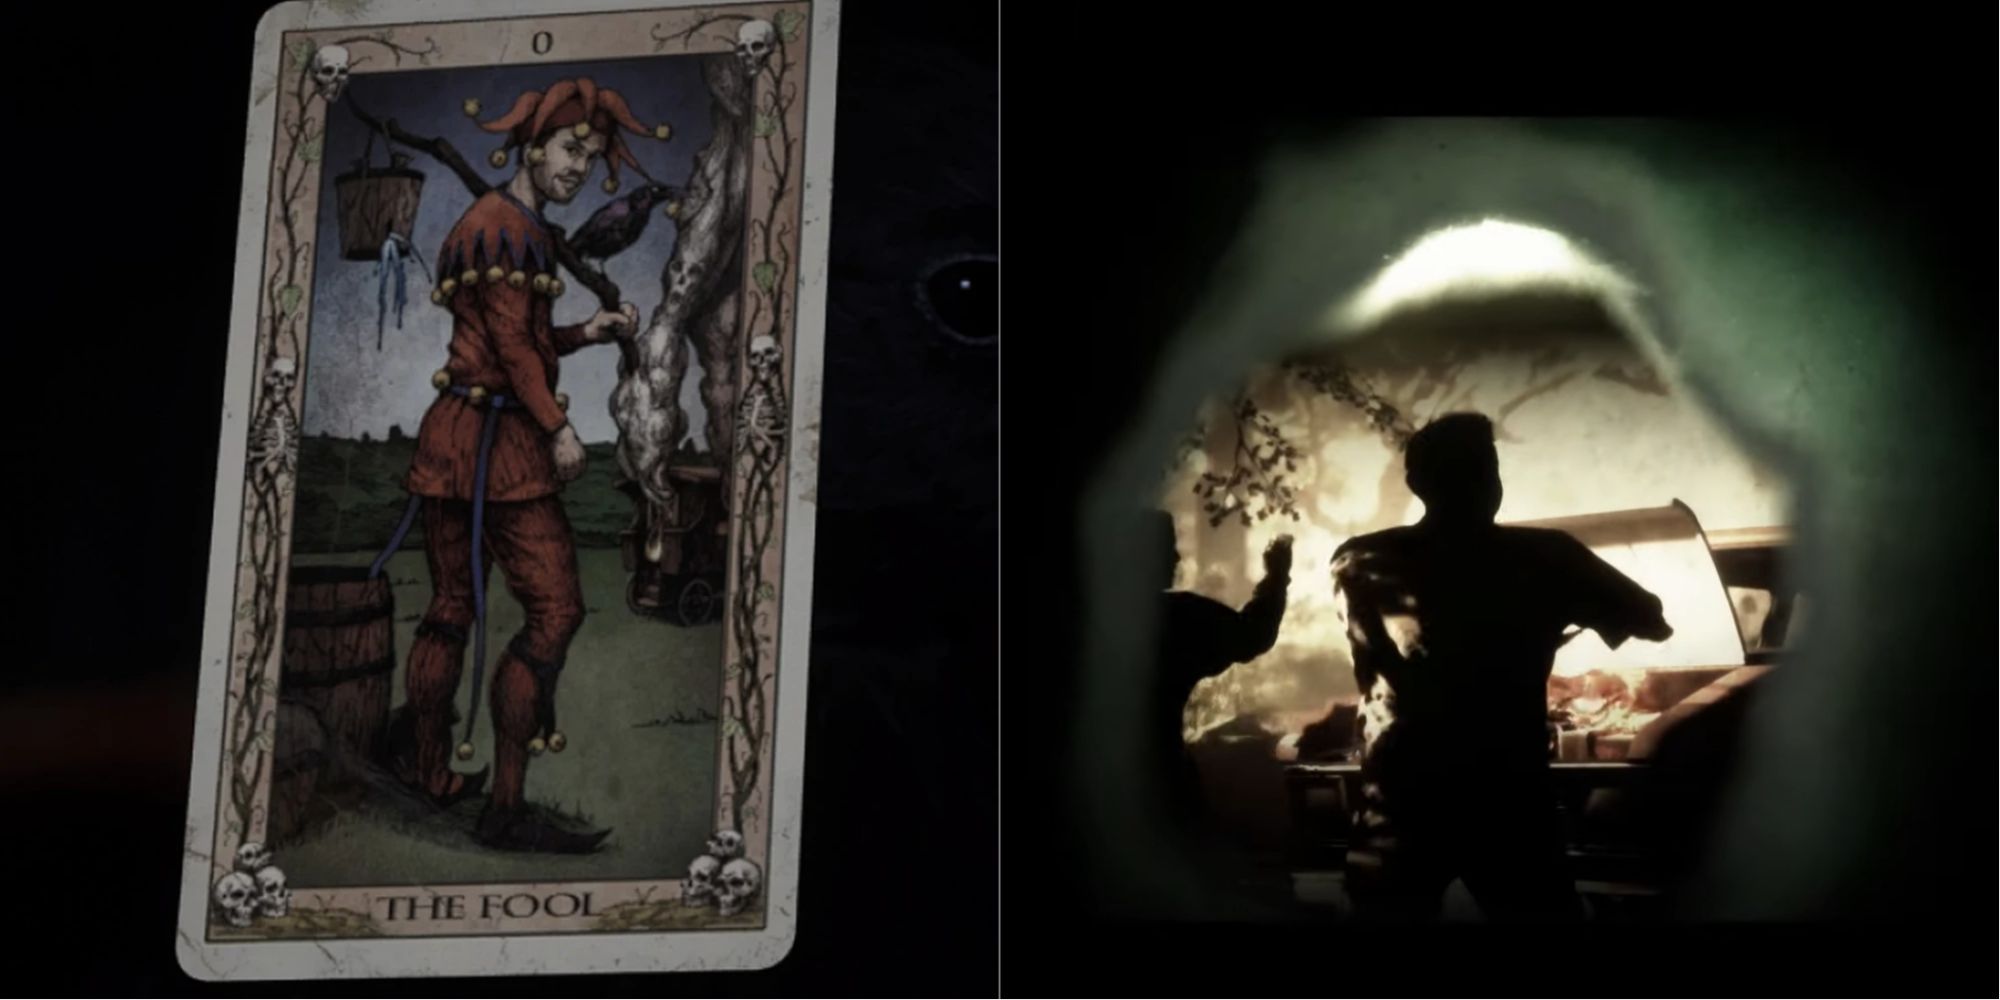 The Fool from The Quarry. We See the game's rendition of The Fool Major Arcana card on the left & an engine fire on the right